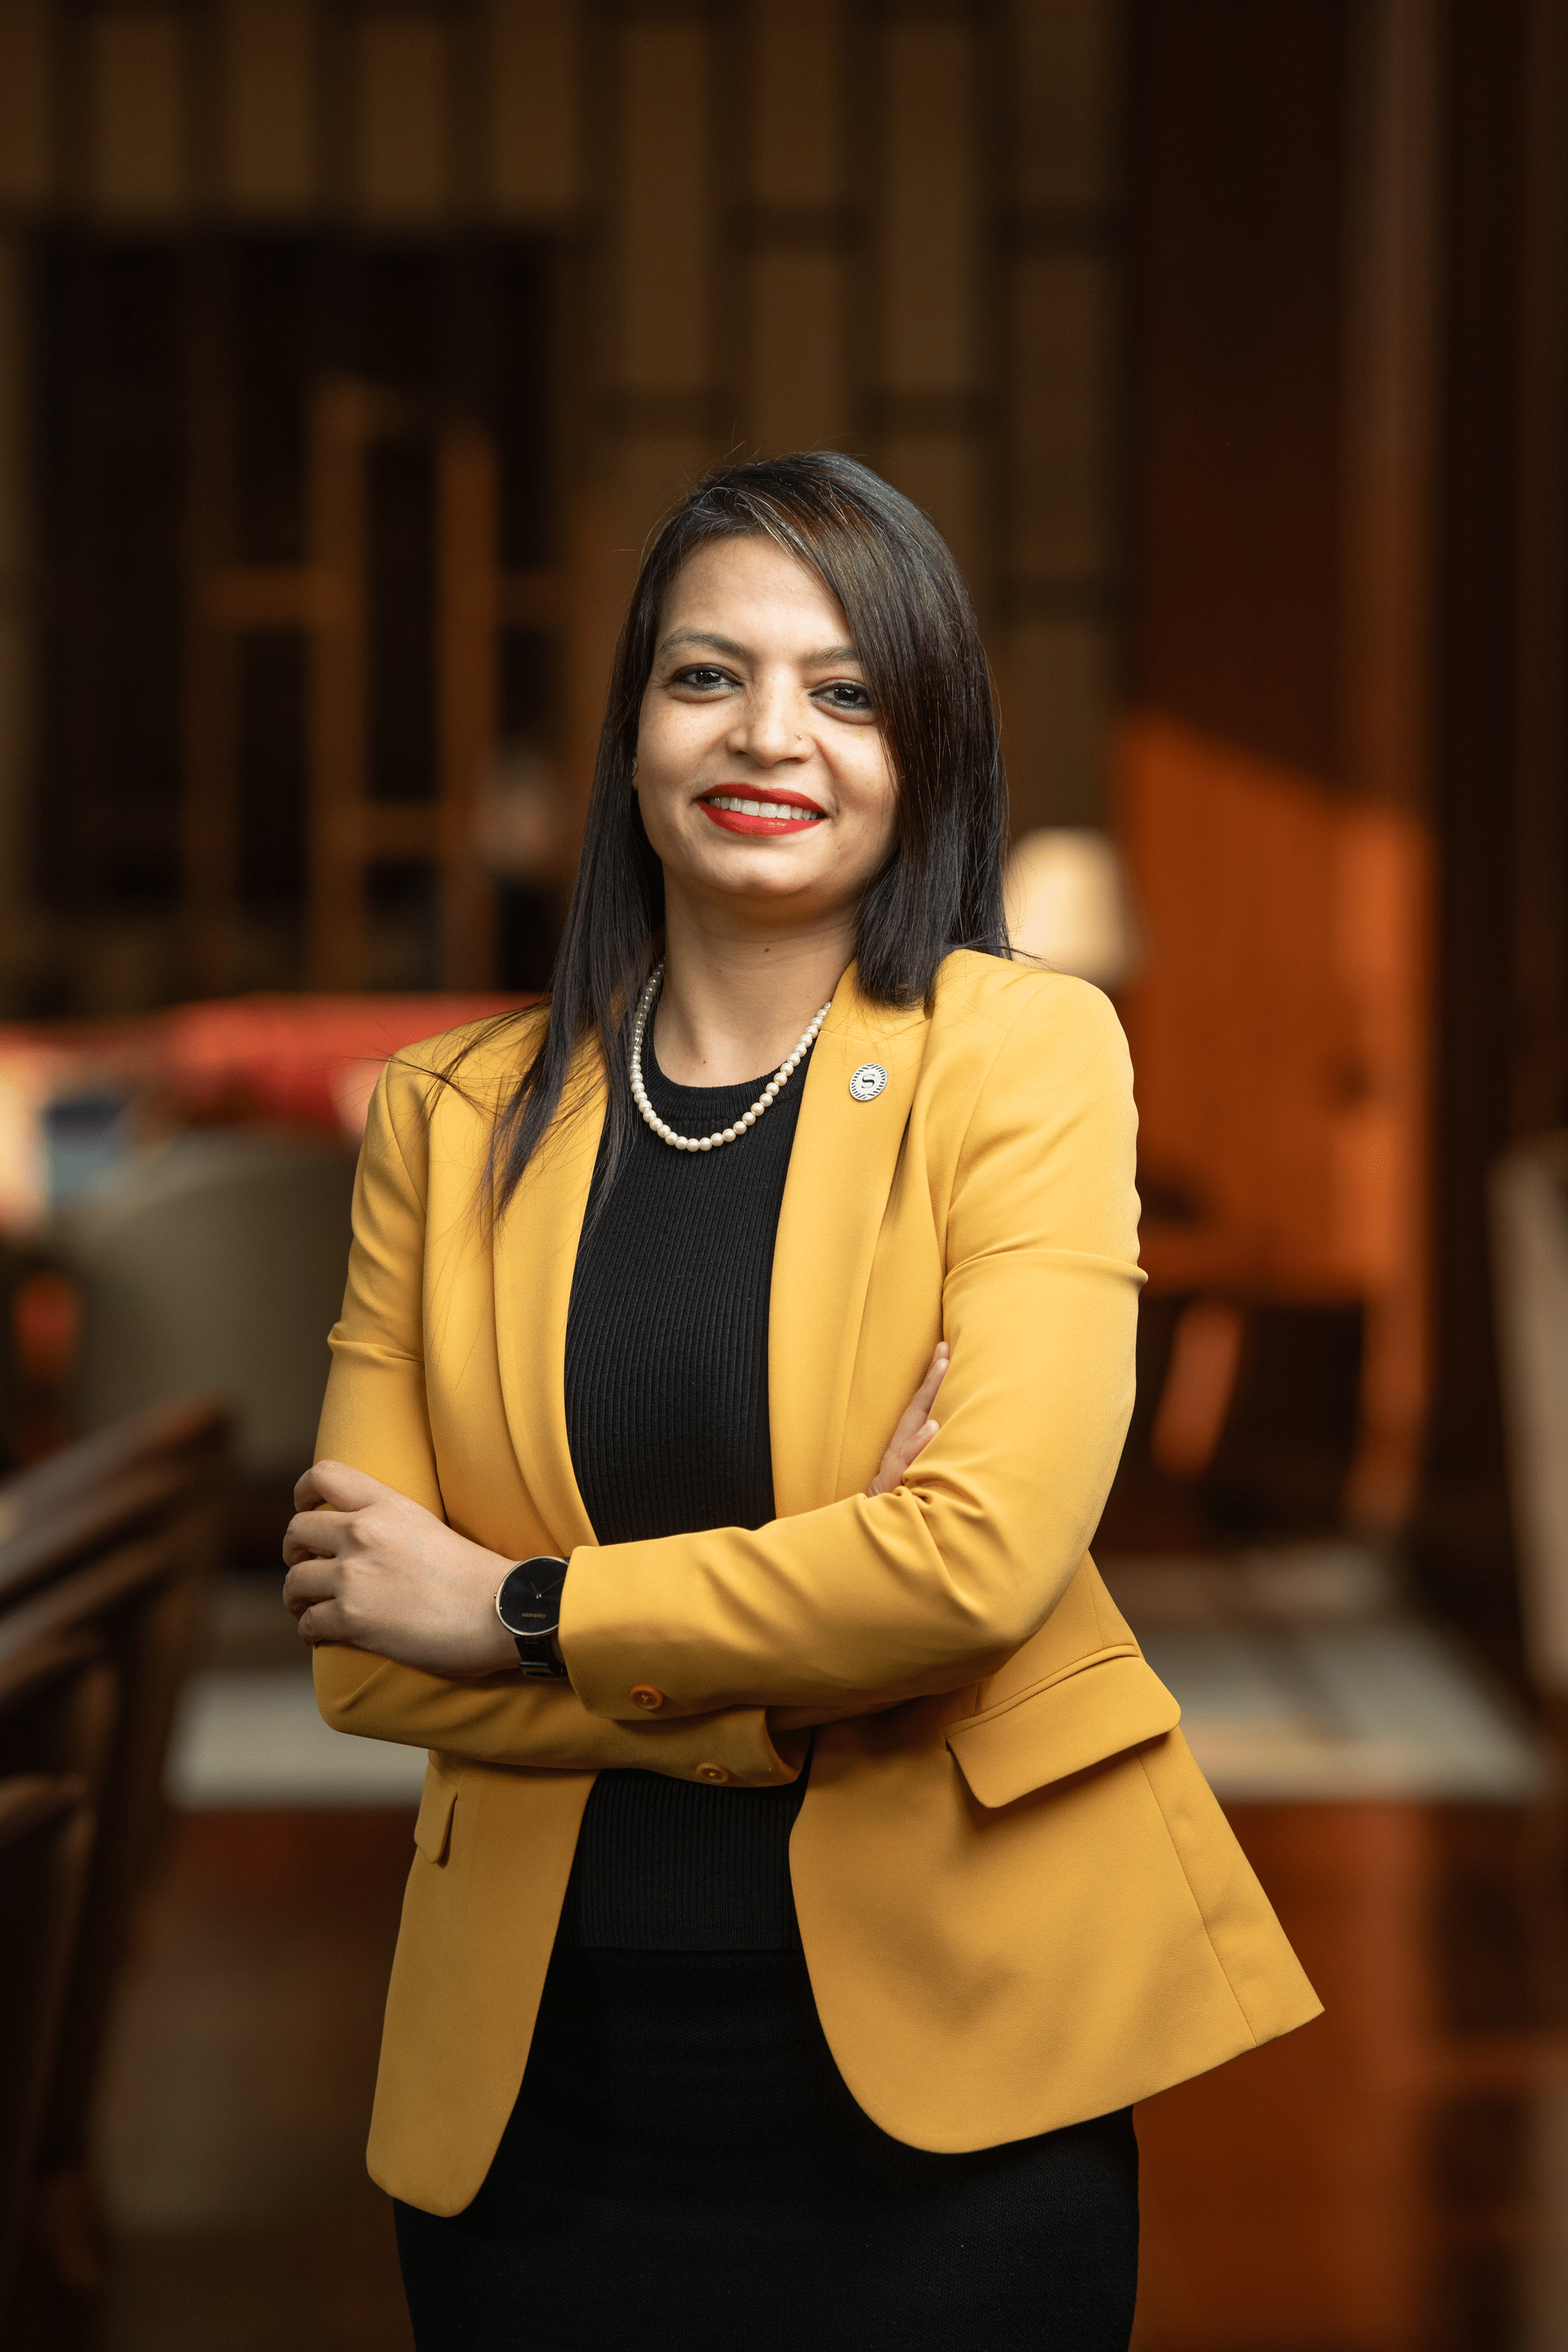 Sheraton Grand Bengaluru appoints Ena Roy as Director, Operations